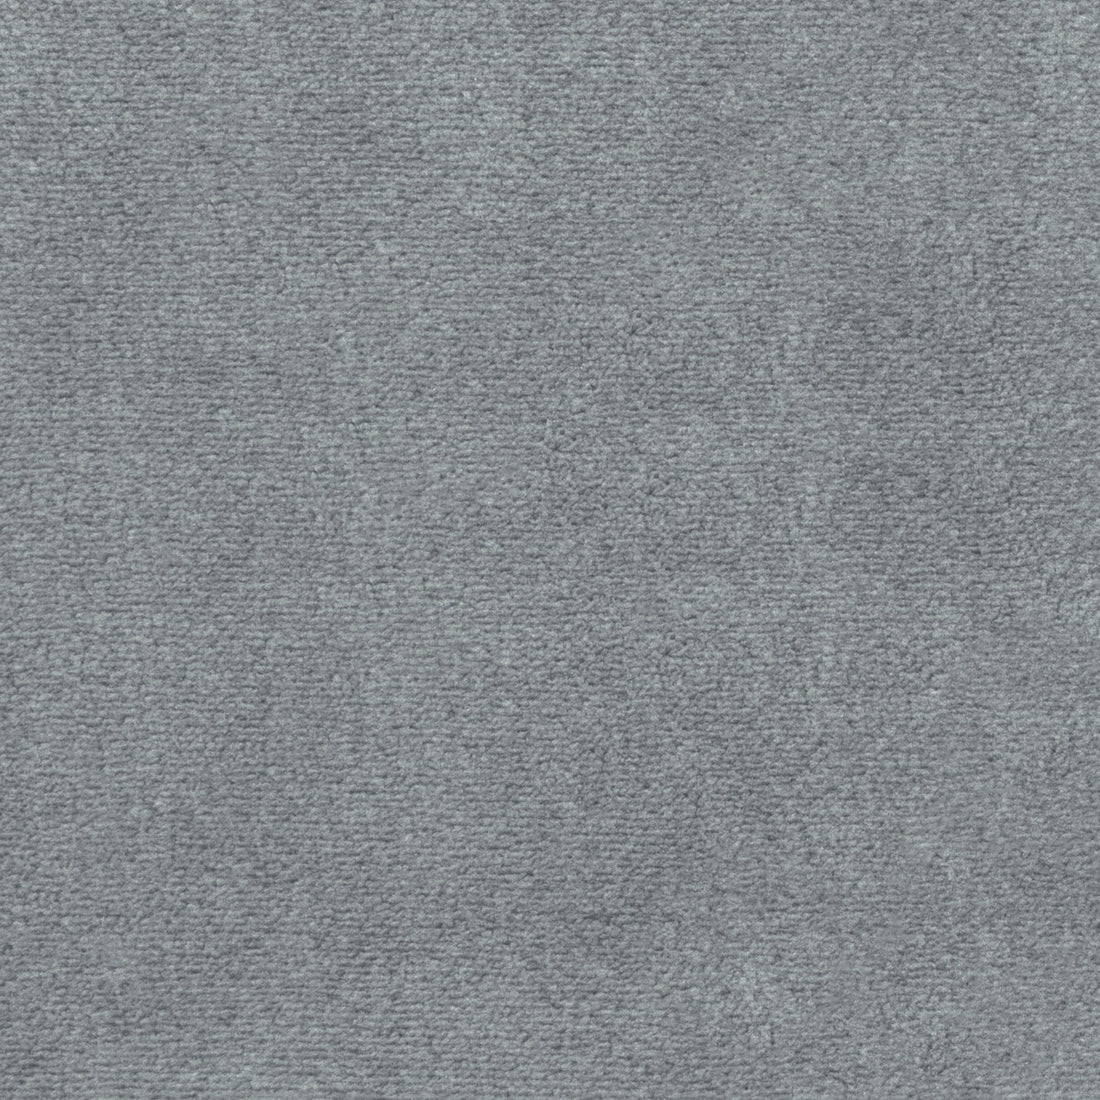 Plushilla fabric in grey color - pattern 36061.11.0 - by Kravet Basics in the Monterey collection